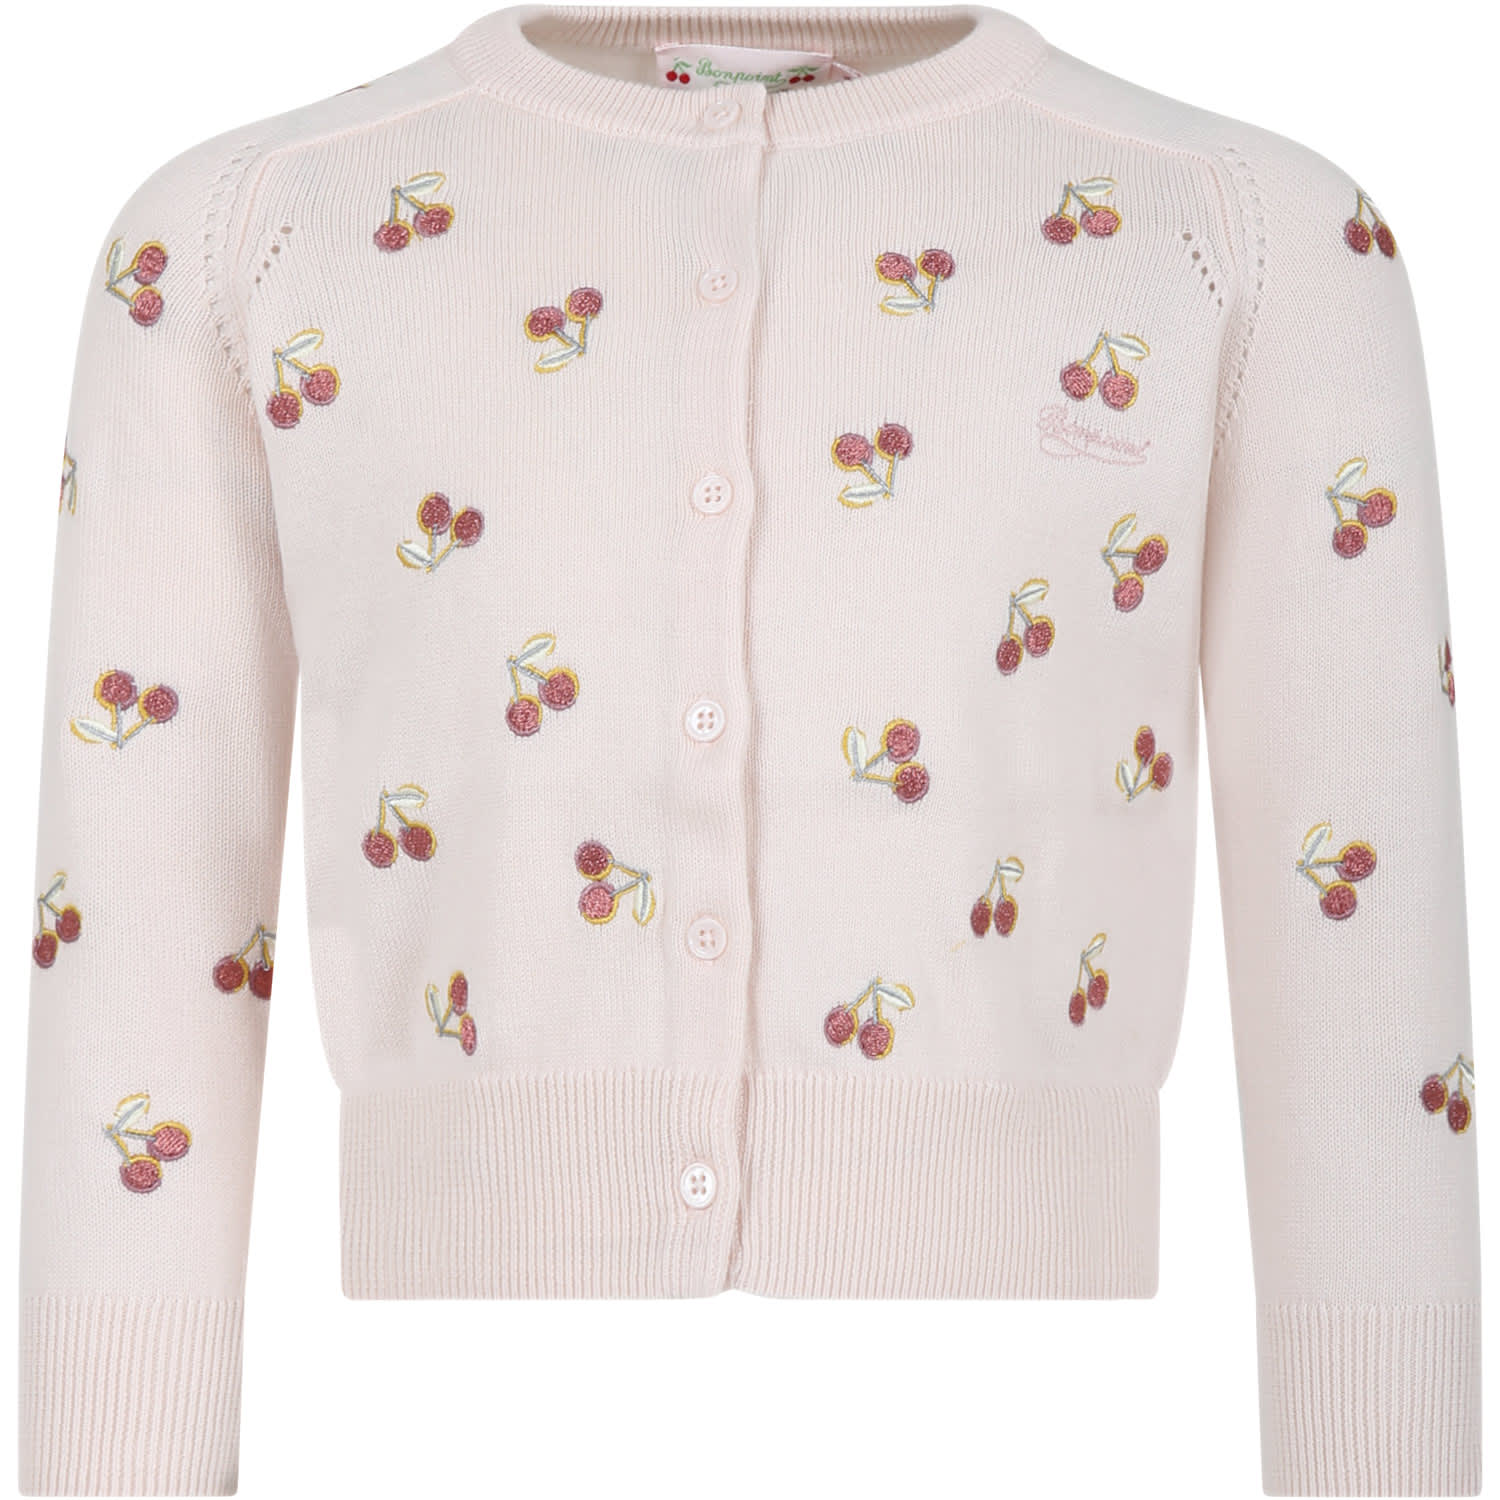 Bonpoint Kids' Pink Cardigan For Girl With Cherries